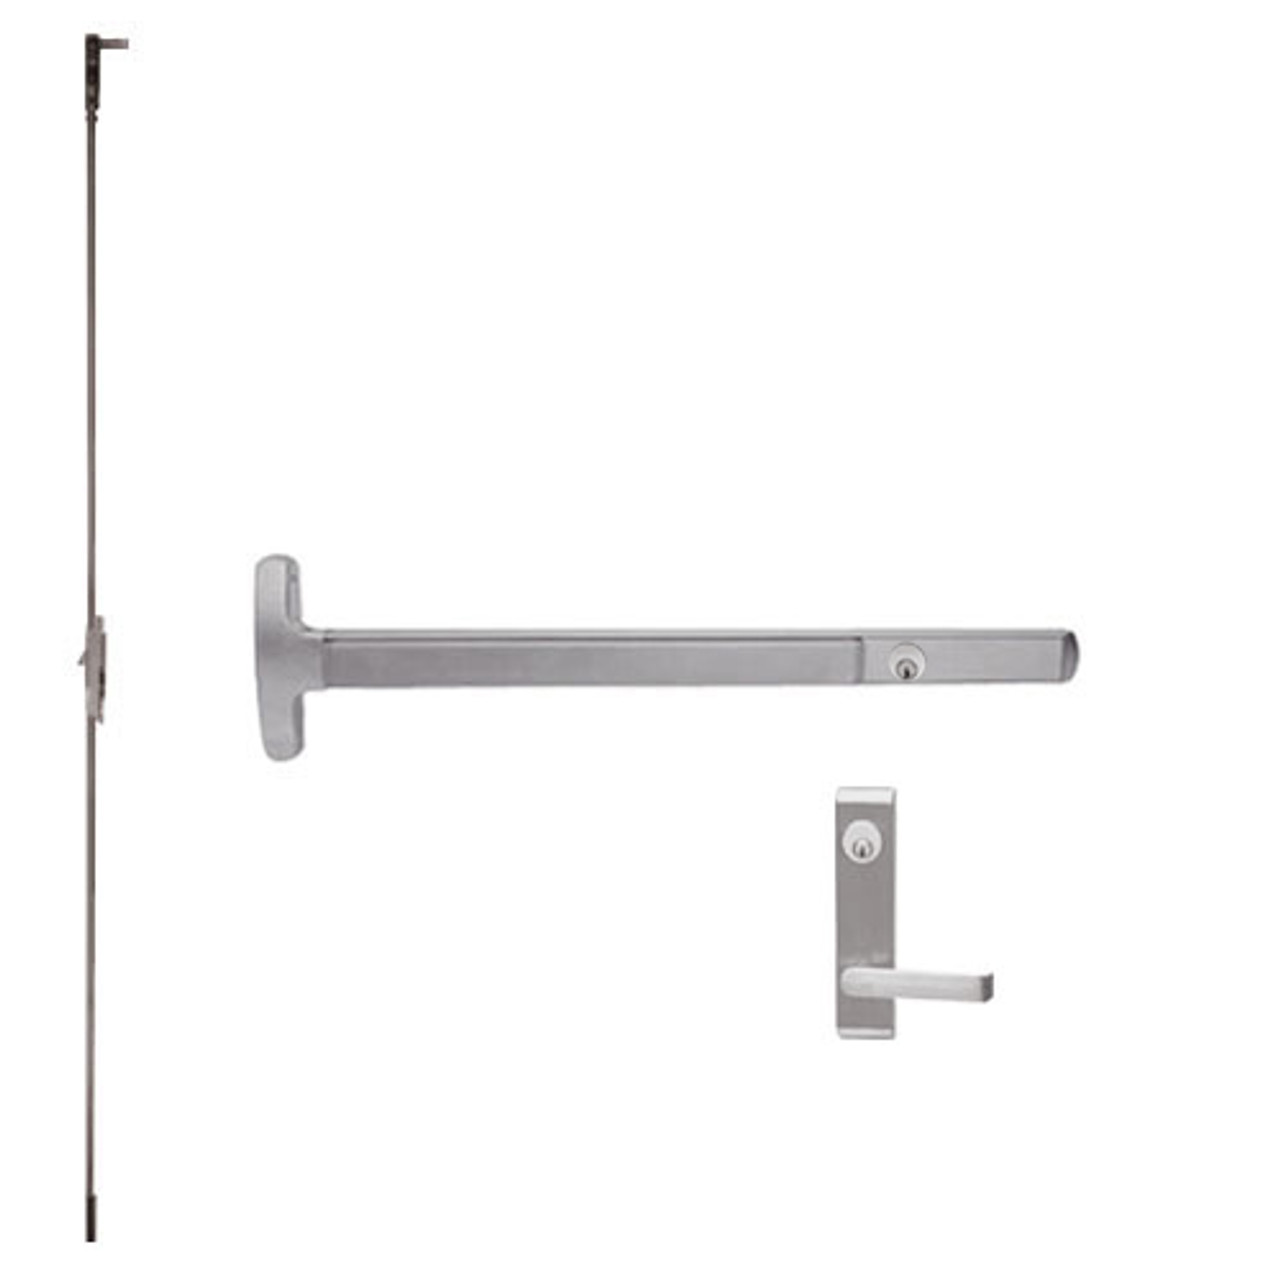 CD24-C-L-DANE-US32D-3-LHR Falcon Exit Device in Satin Stainless Steel